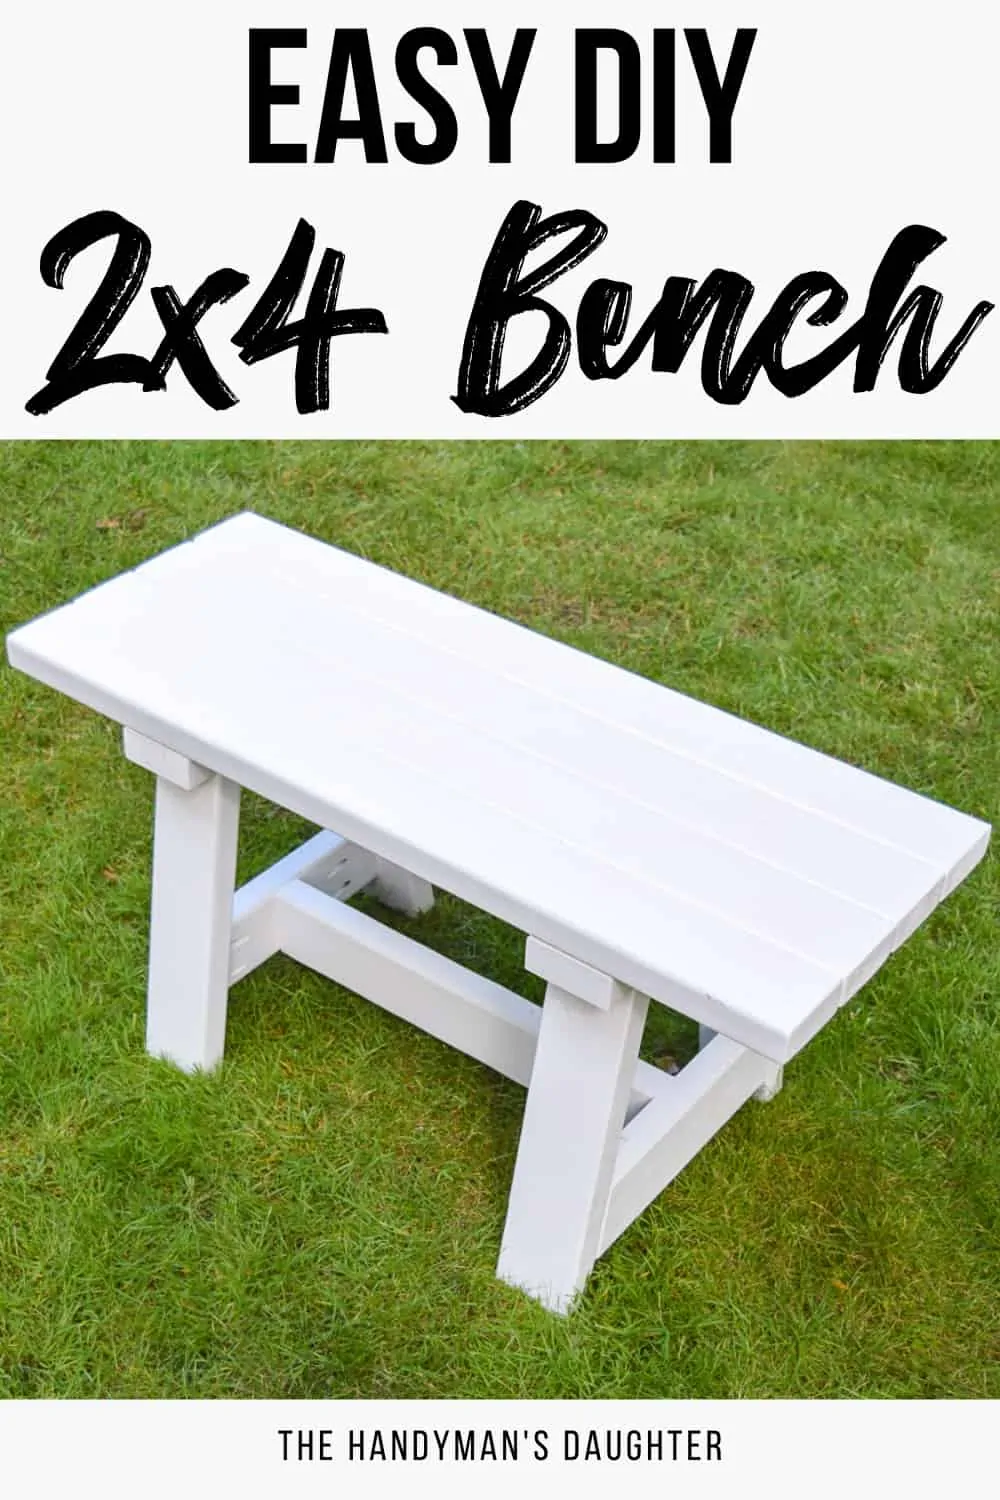 Easy DIY 2x4 Bench with Free Plans - The Handyman's Daughter